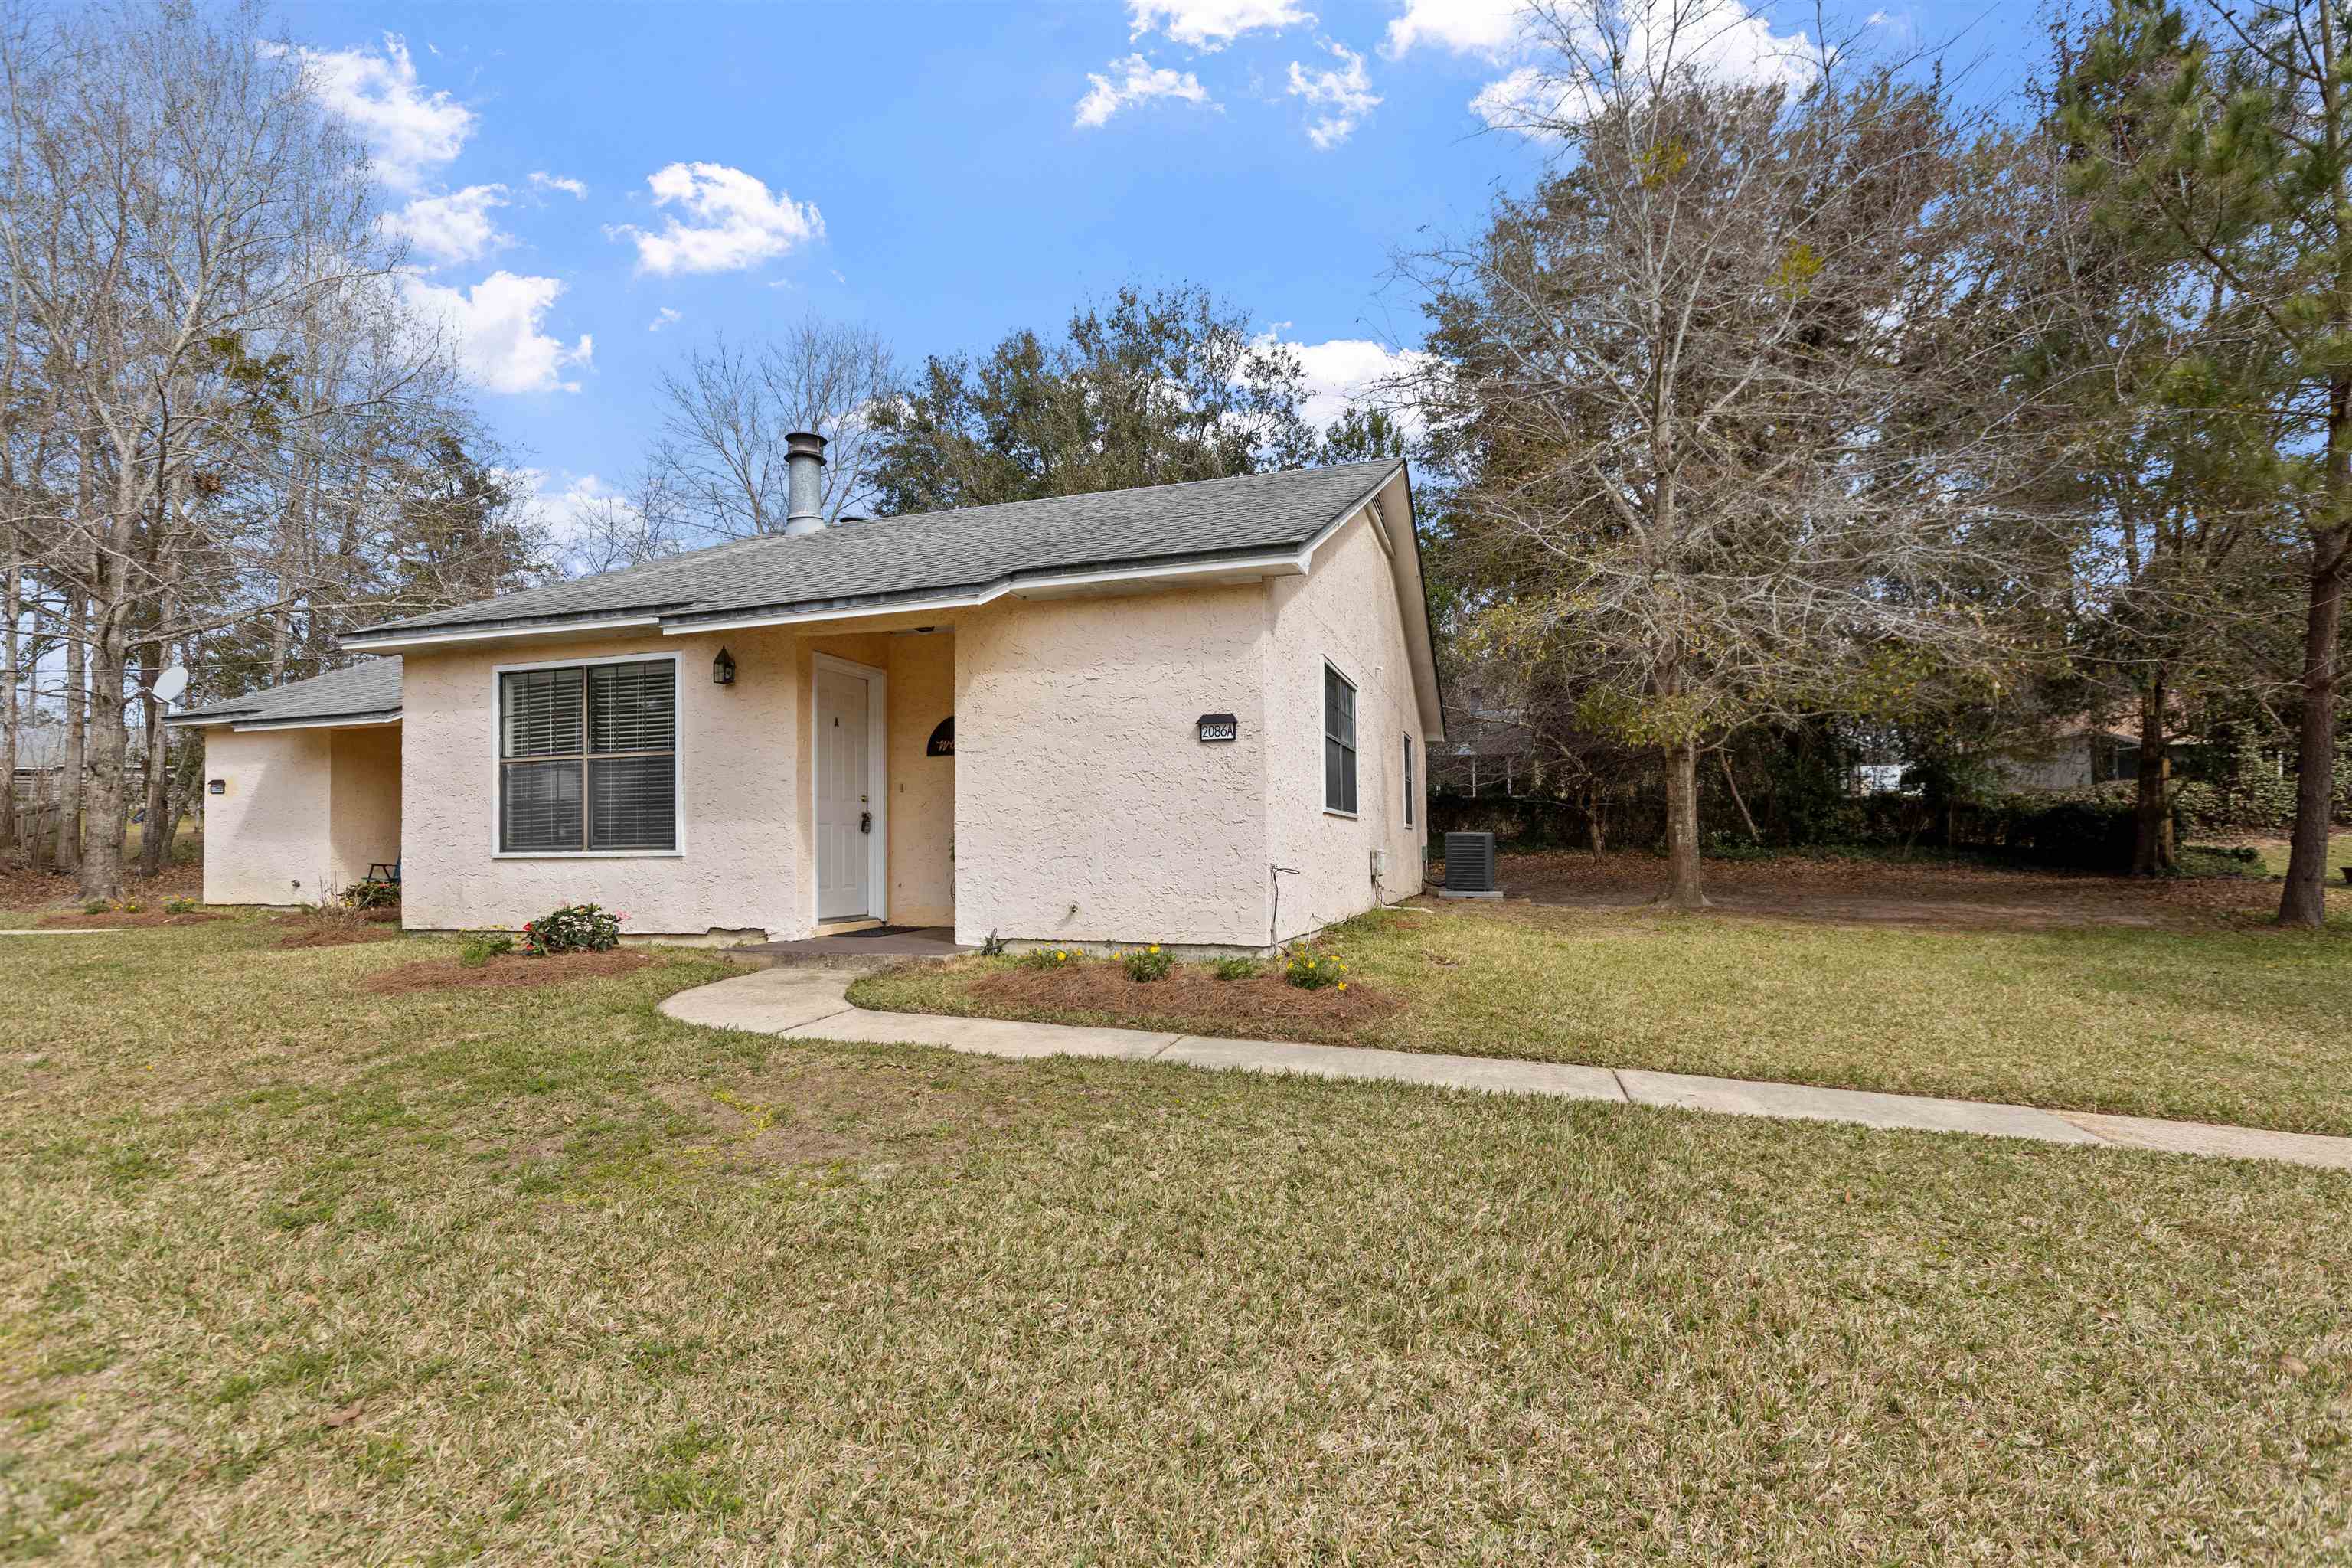 2086 Admiral,TALLAHASSEE,Florida 32308,5 Bedrooms Bedrooms,1 BathroomBathrooms,Multi-family,Admiral,366334